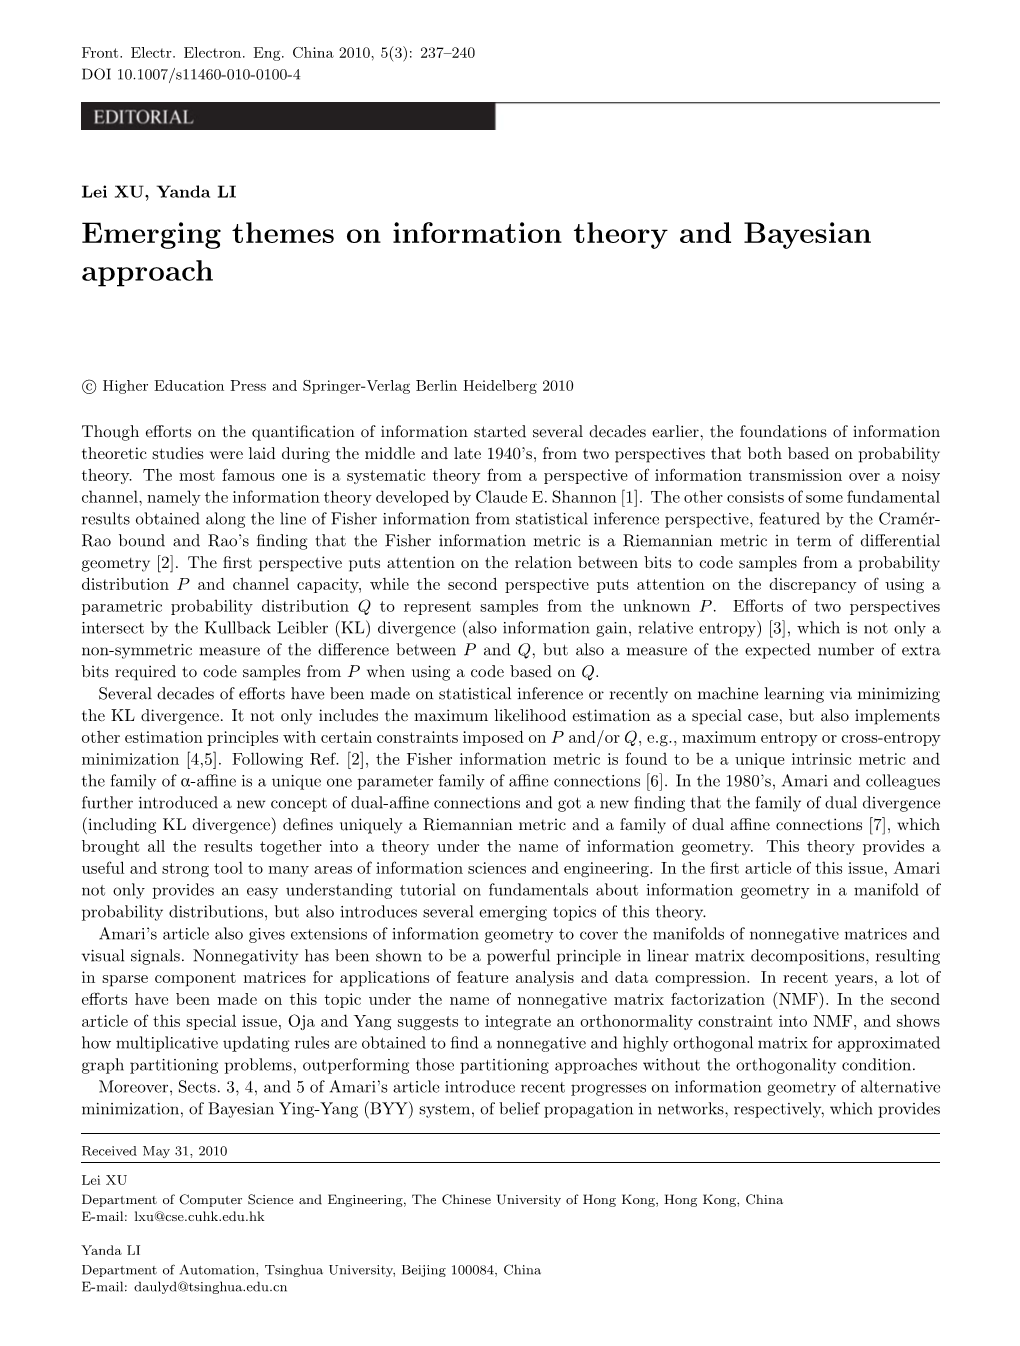 Emerging Themes on Information Theory and Bayesian Approach